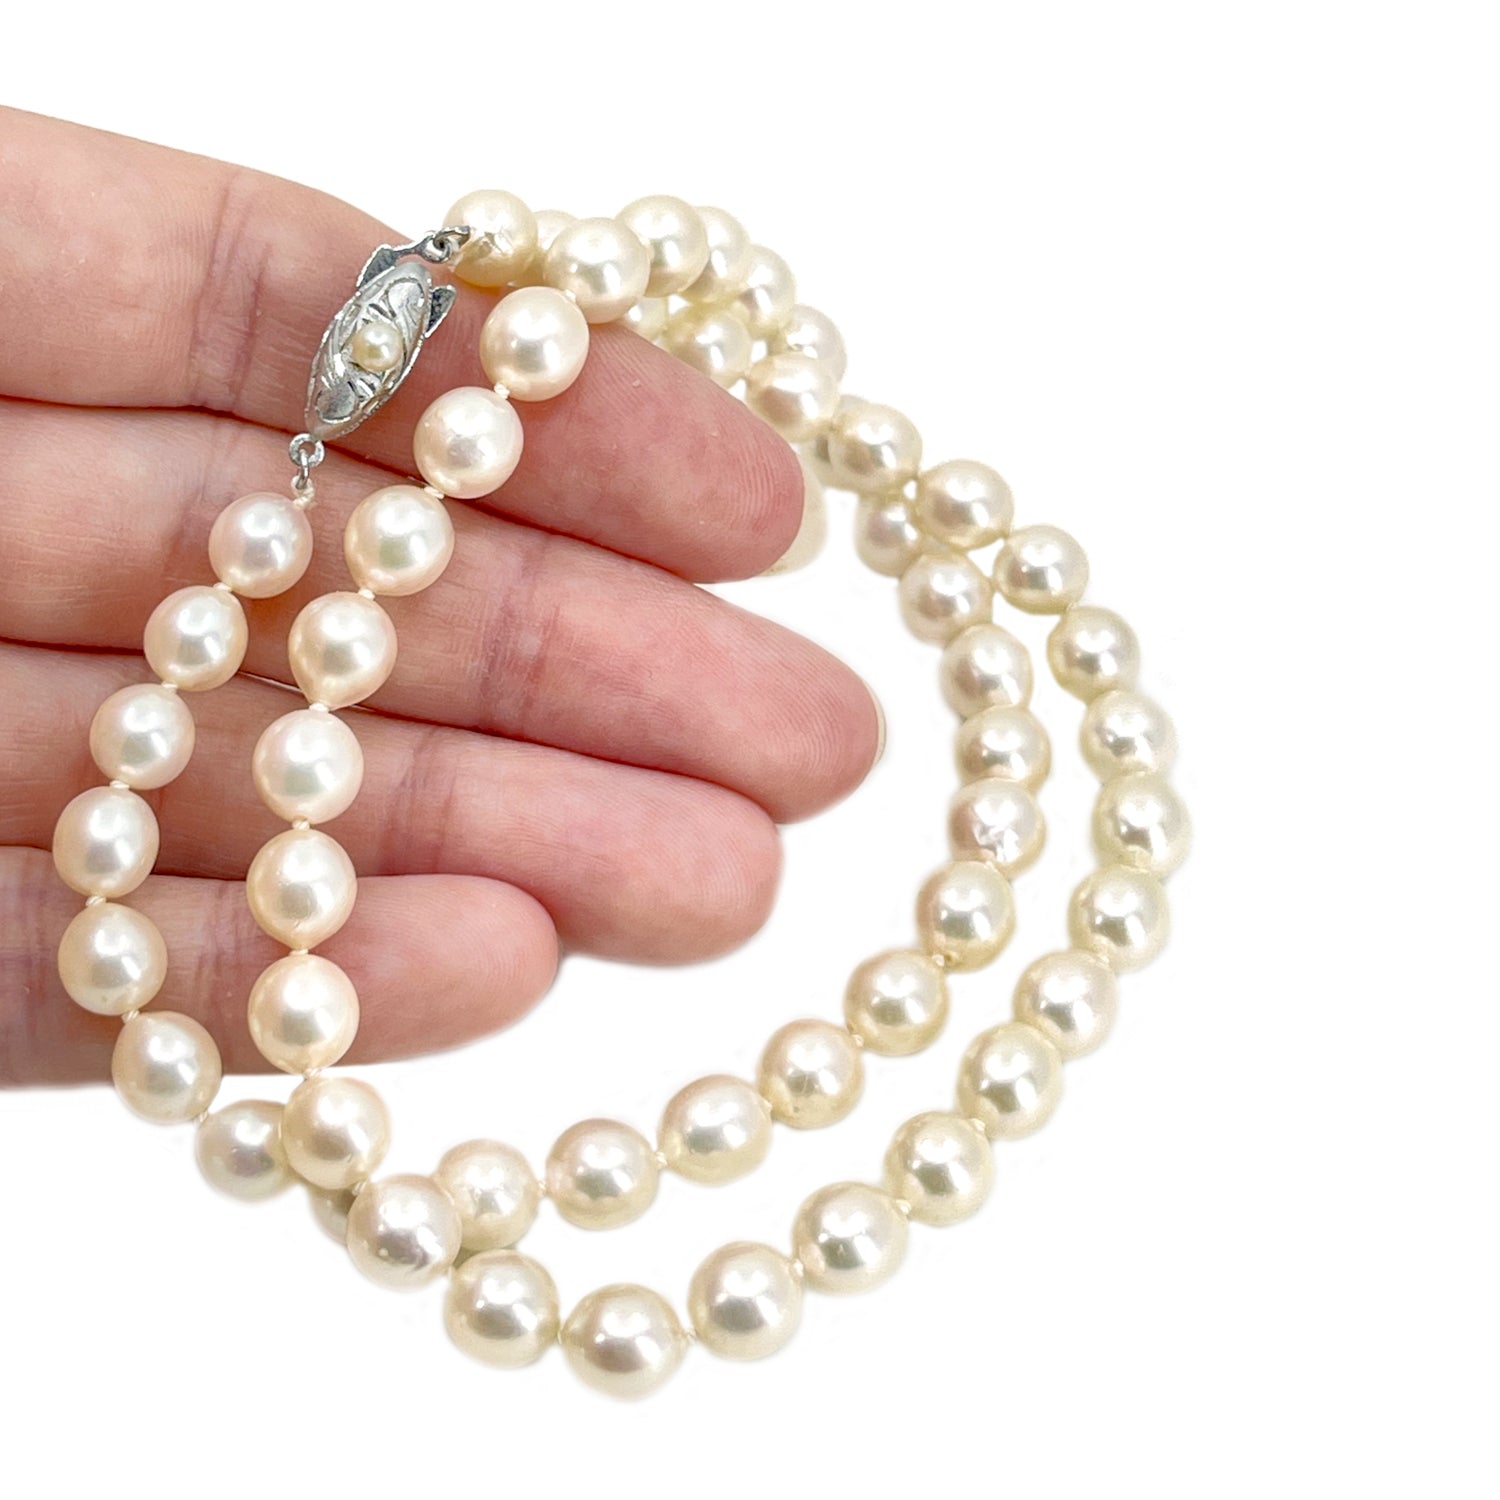 Large Semi-Baroque Vintage Japanese Saltwater Cultured Akoya Pearl Necklace - Sterling Silver 18 Inch